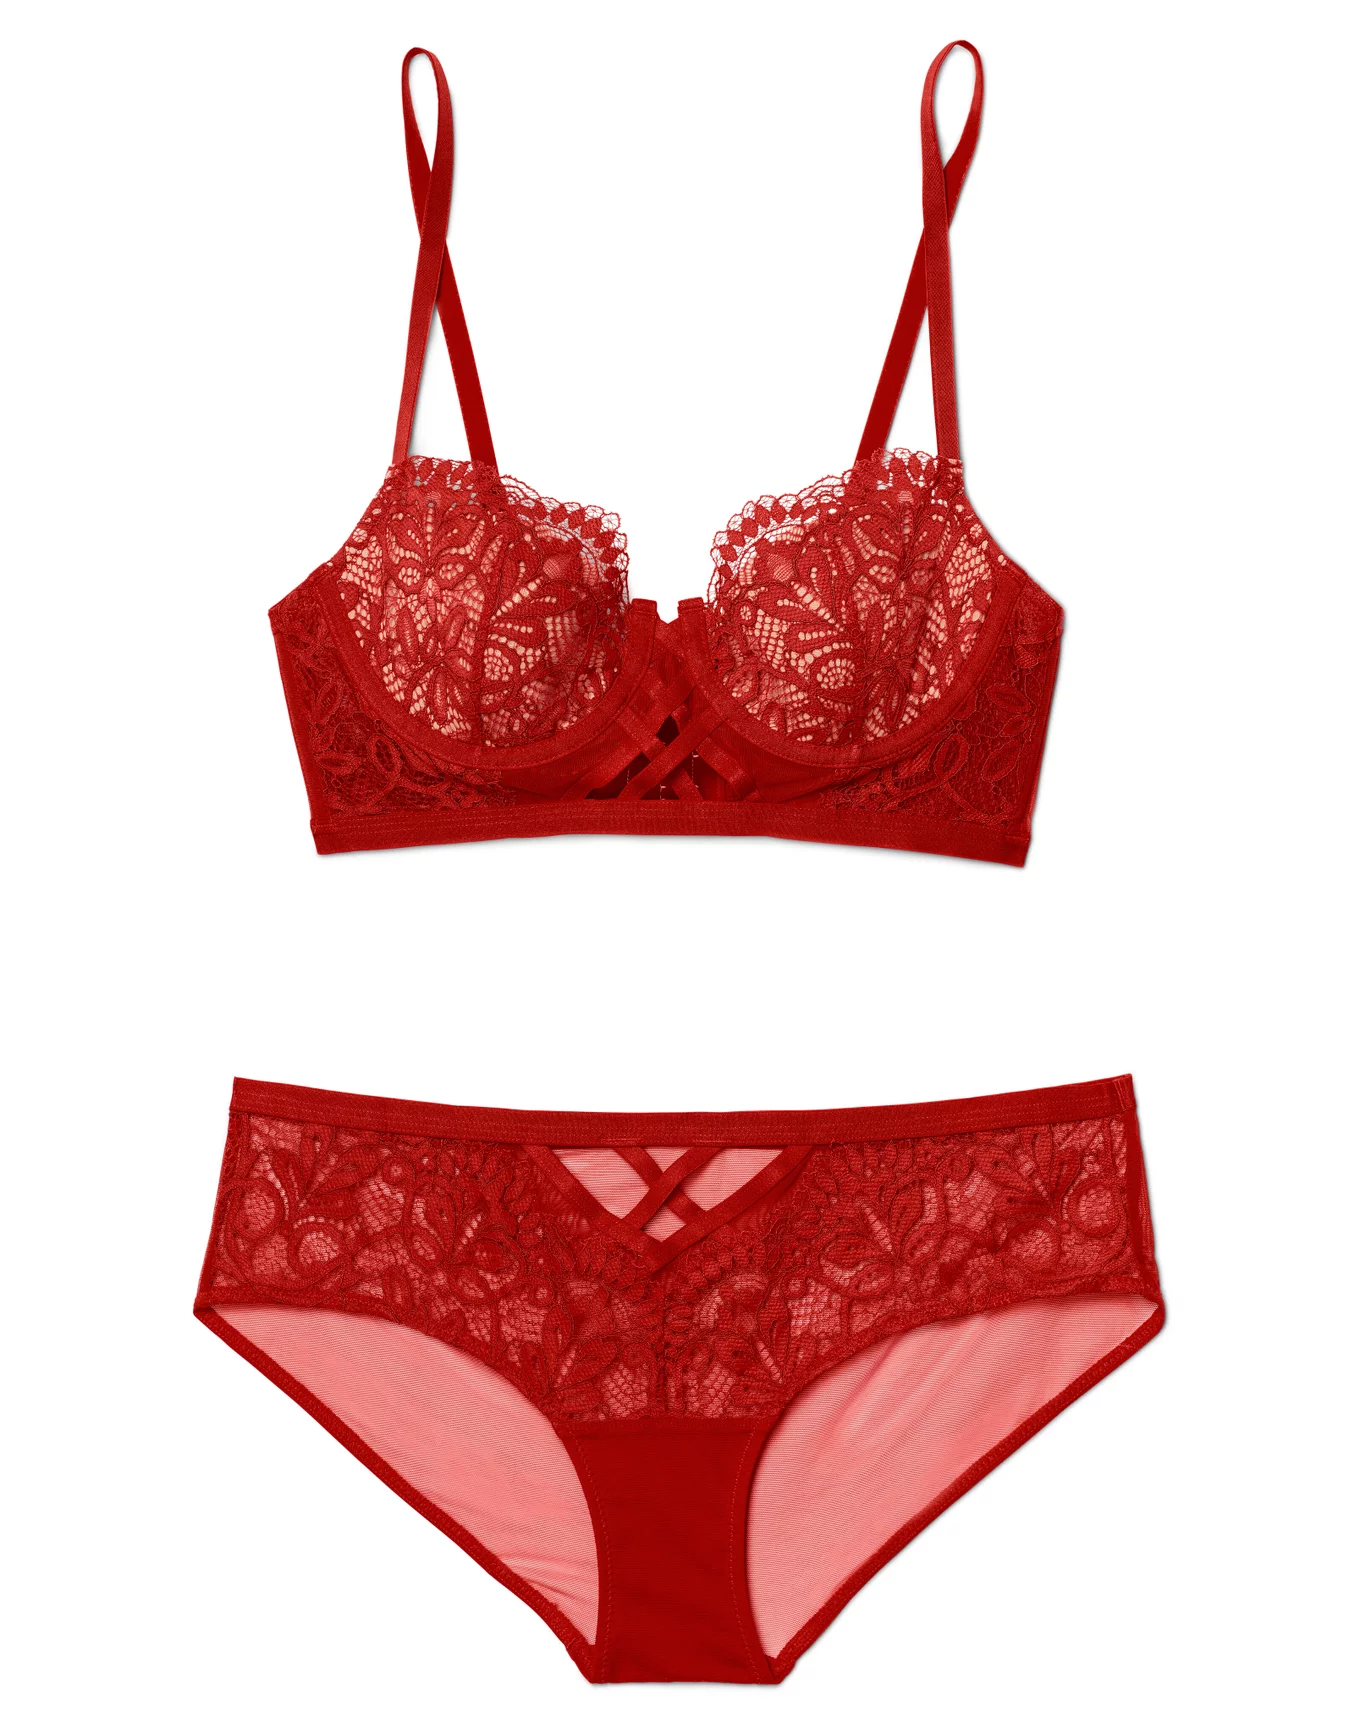  Womens Plus Size Bras Full Coverage Lace Underwire Unlined  Bra Up To J Lipstick Red 38D